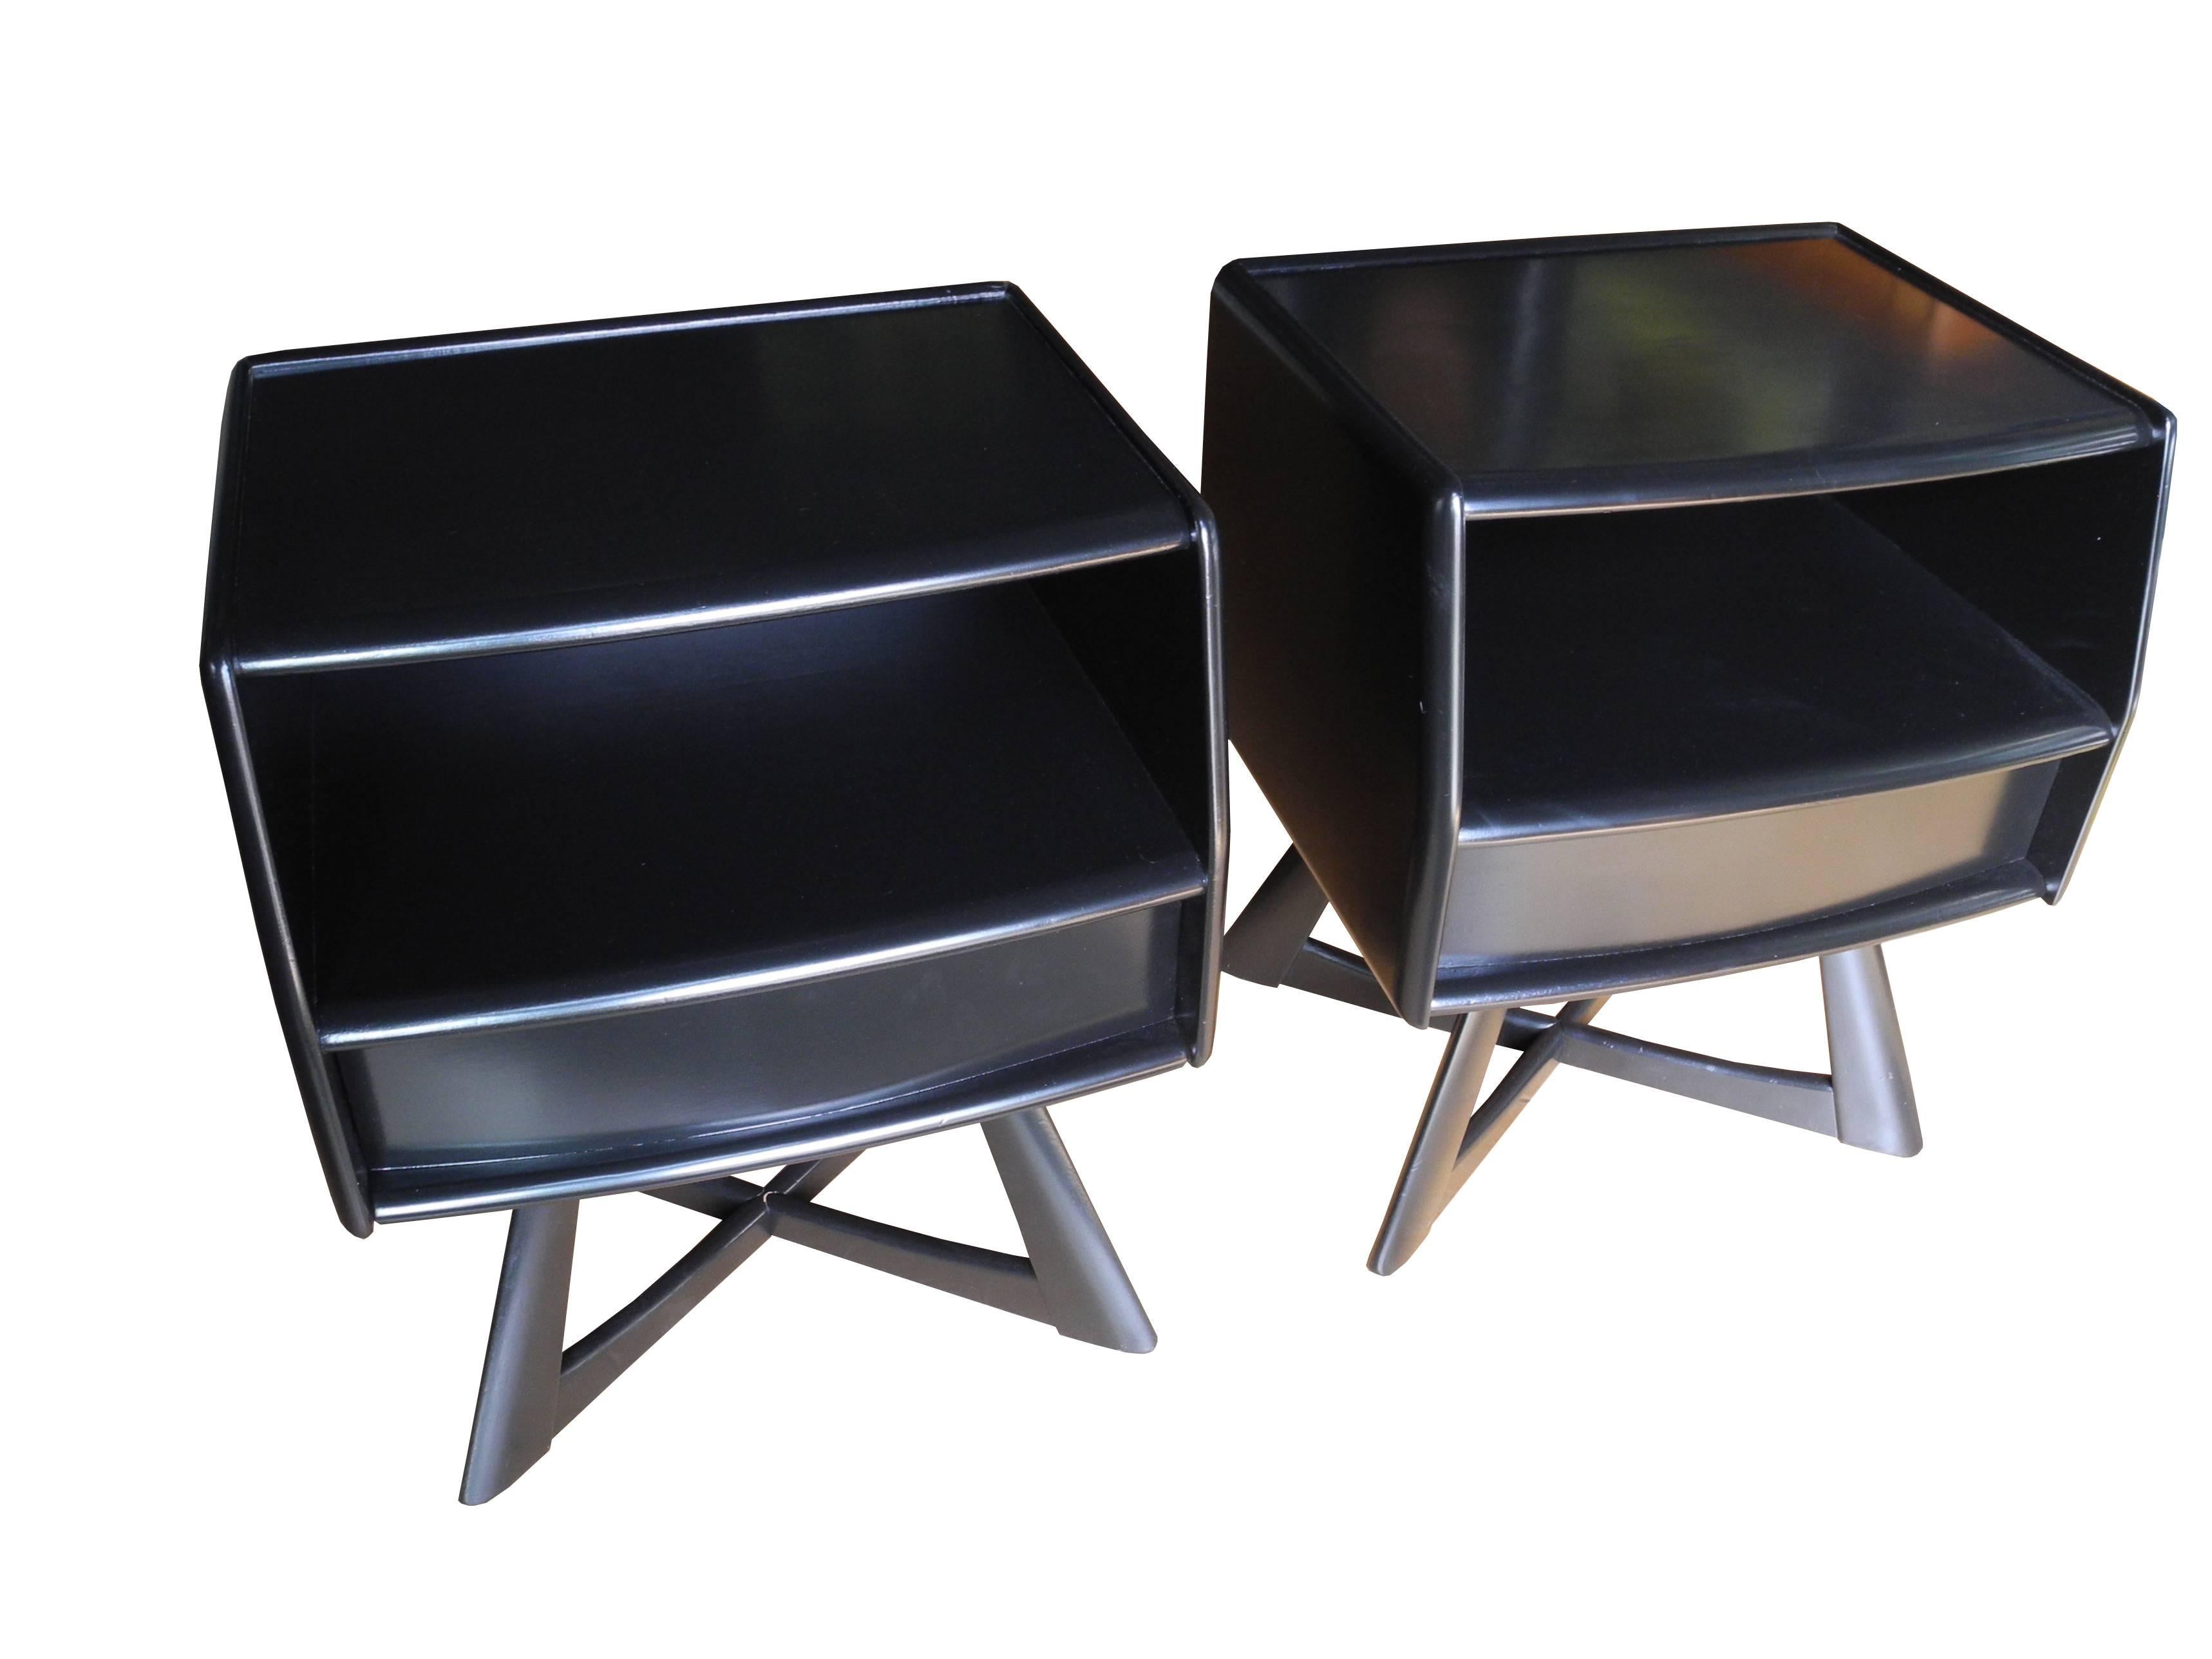 These 1950s bedside tables have a cubby and bottom drawer. They have been newly painted and lacquered in black.